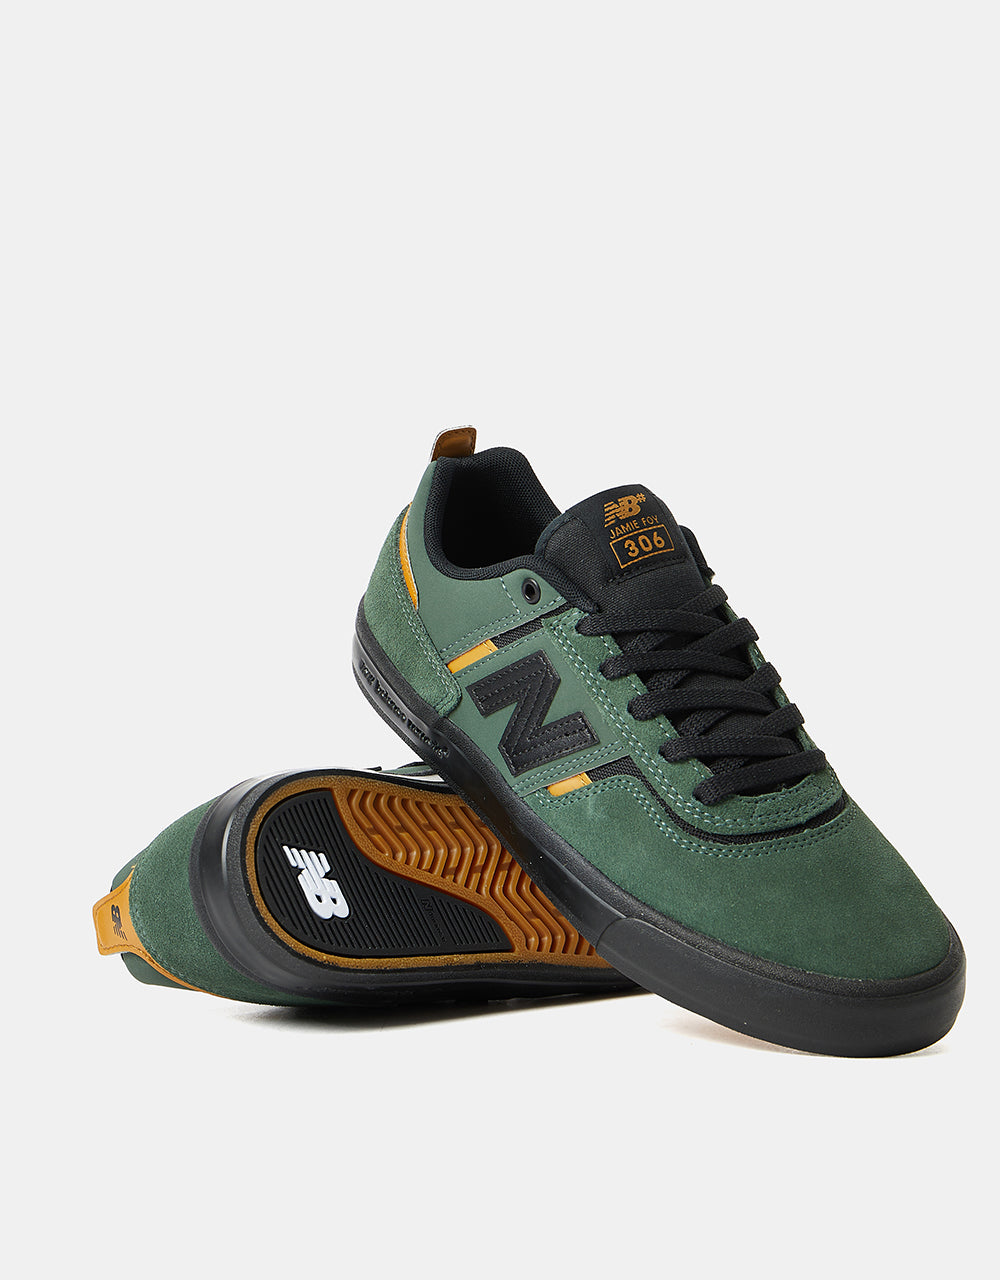 New Balance Numeric 306 Skate Shoes - Forest/Black